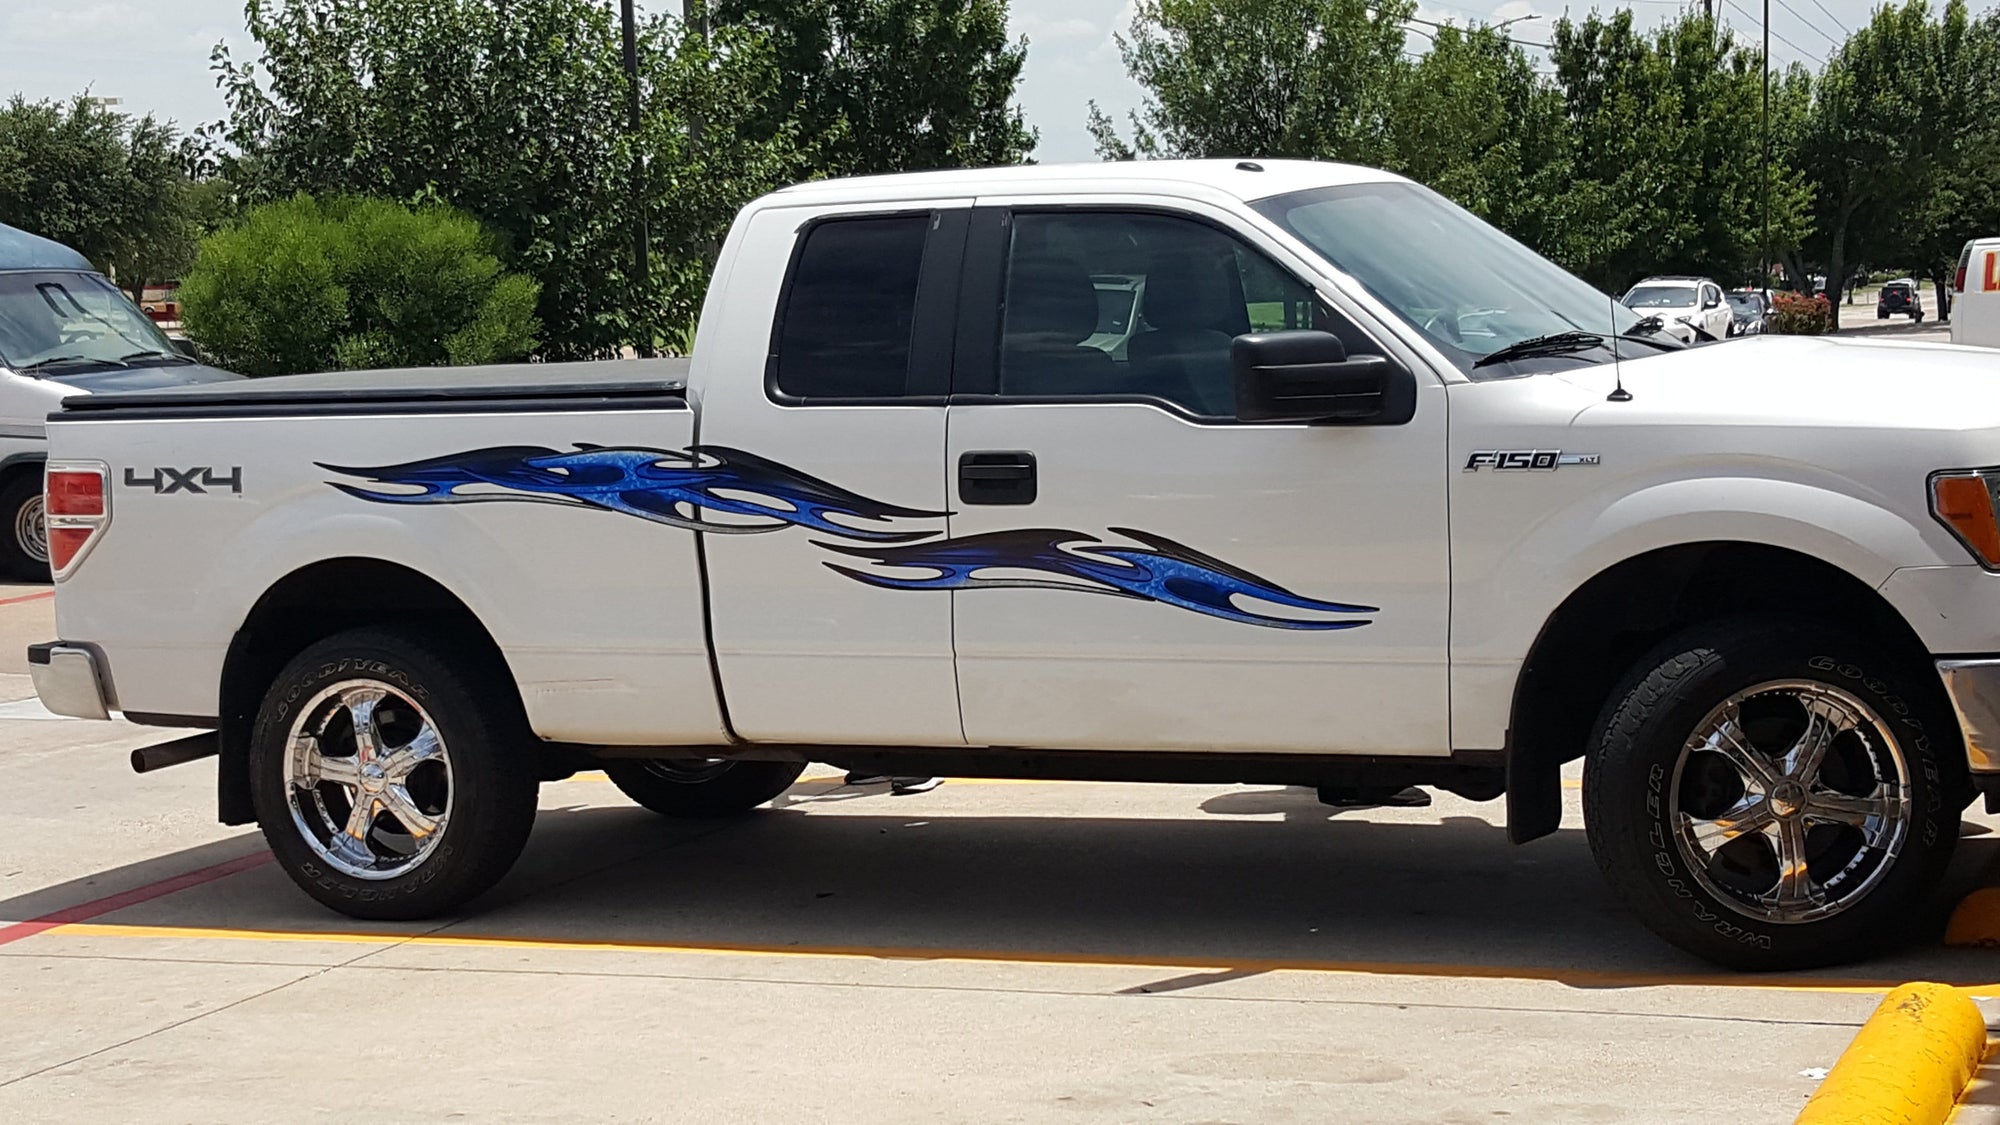 tribal chains decals on f150 white truck